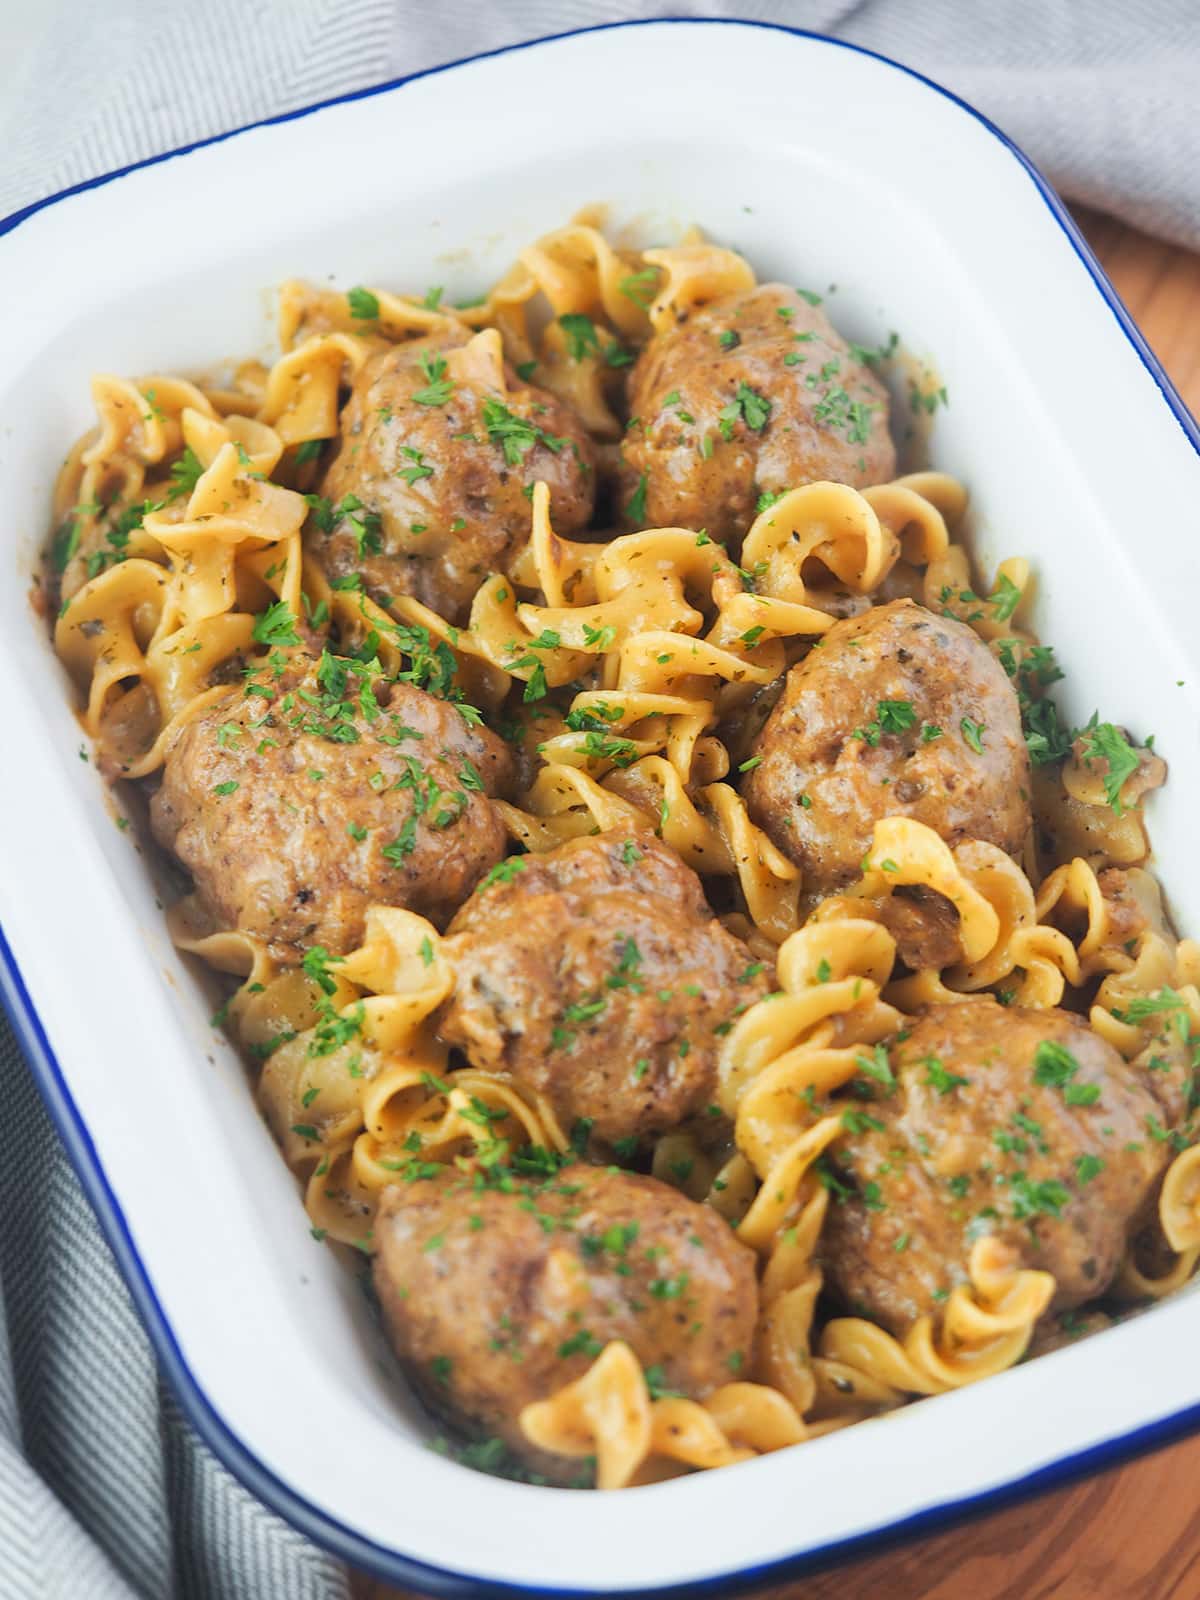 meatballs and gravy in white serving dish